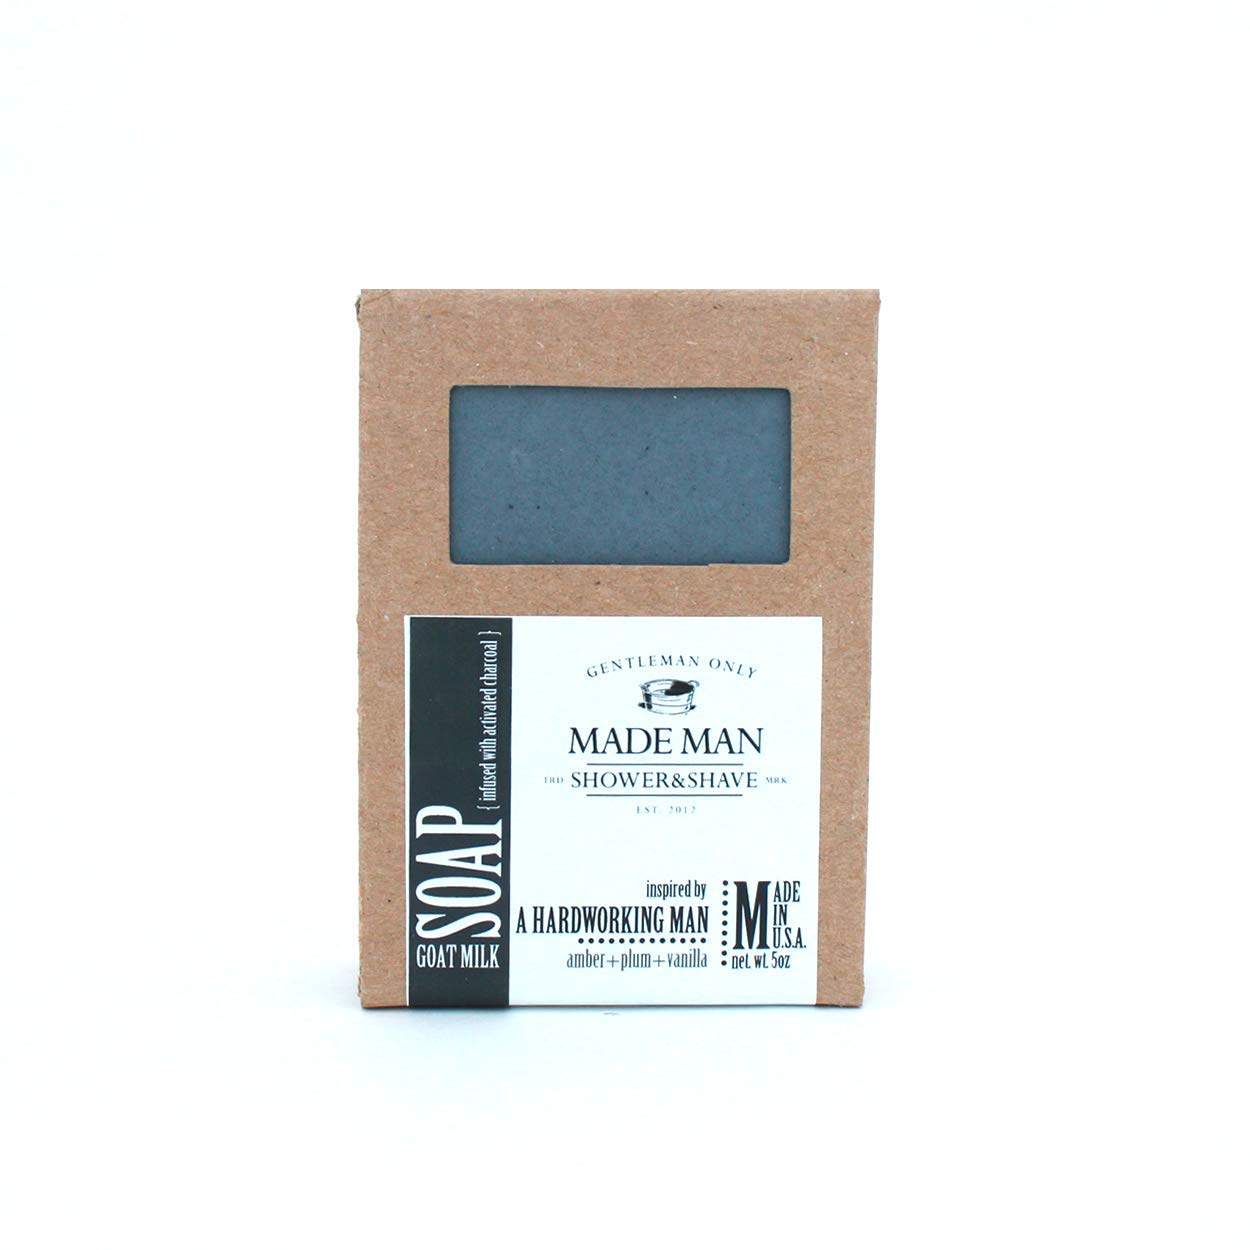 Made Man Handcrafted 'Manly' Bar Soaps